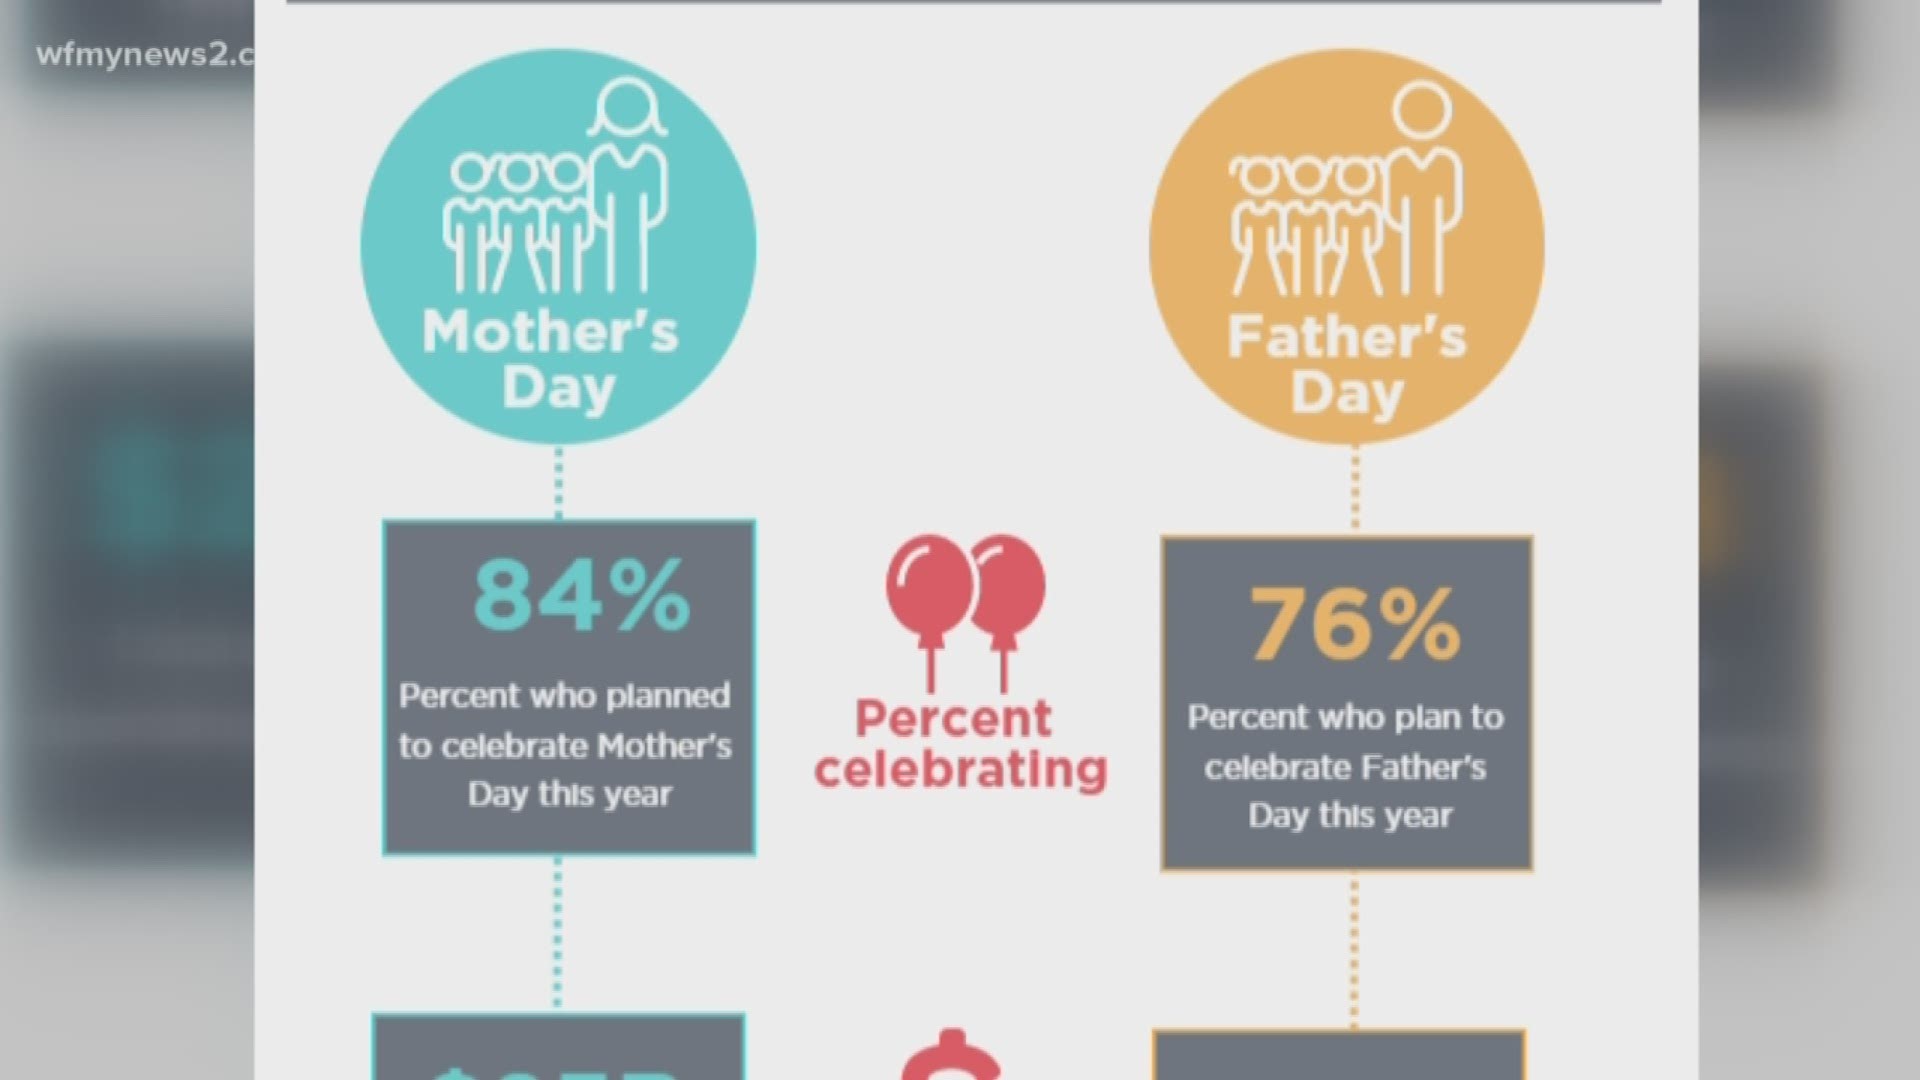 Father's Day Vs. Mother's Day Spending | wfmynews2.com